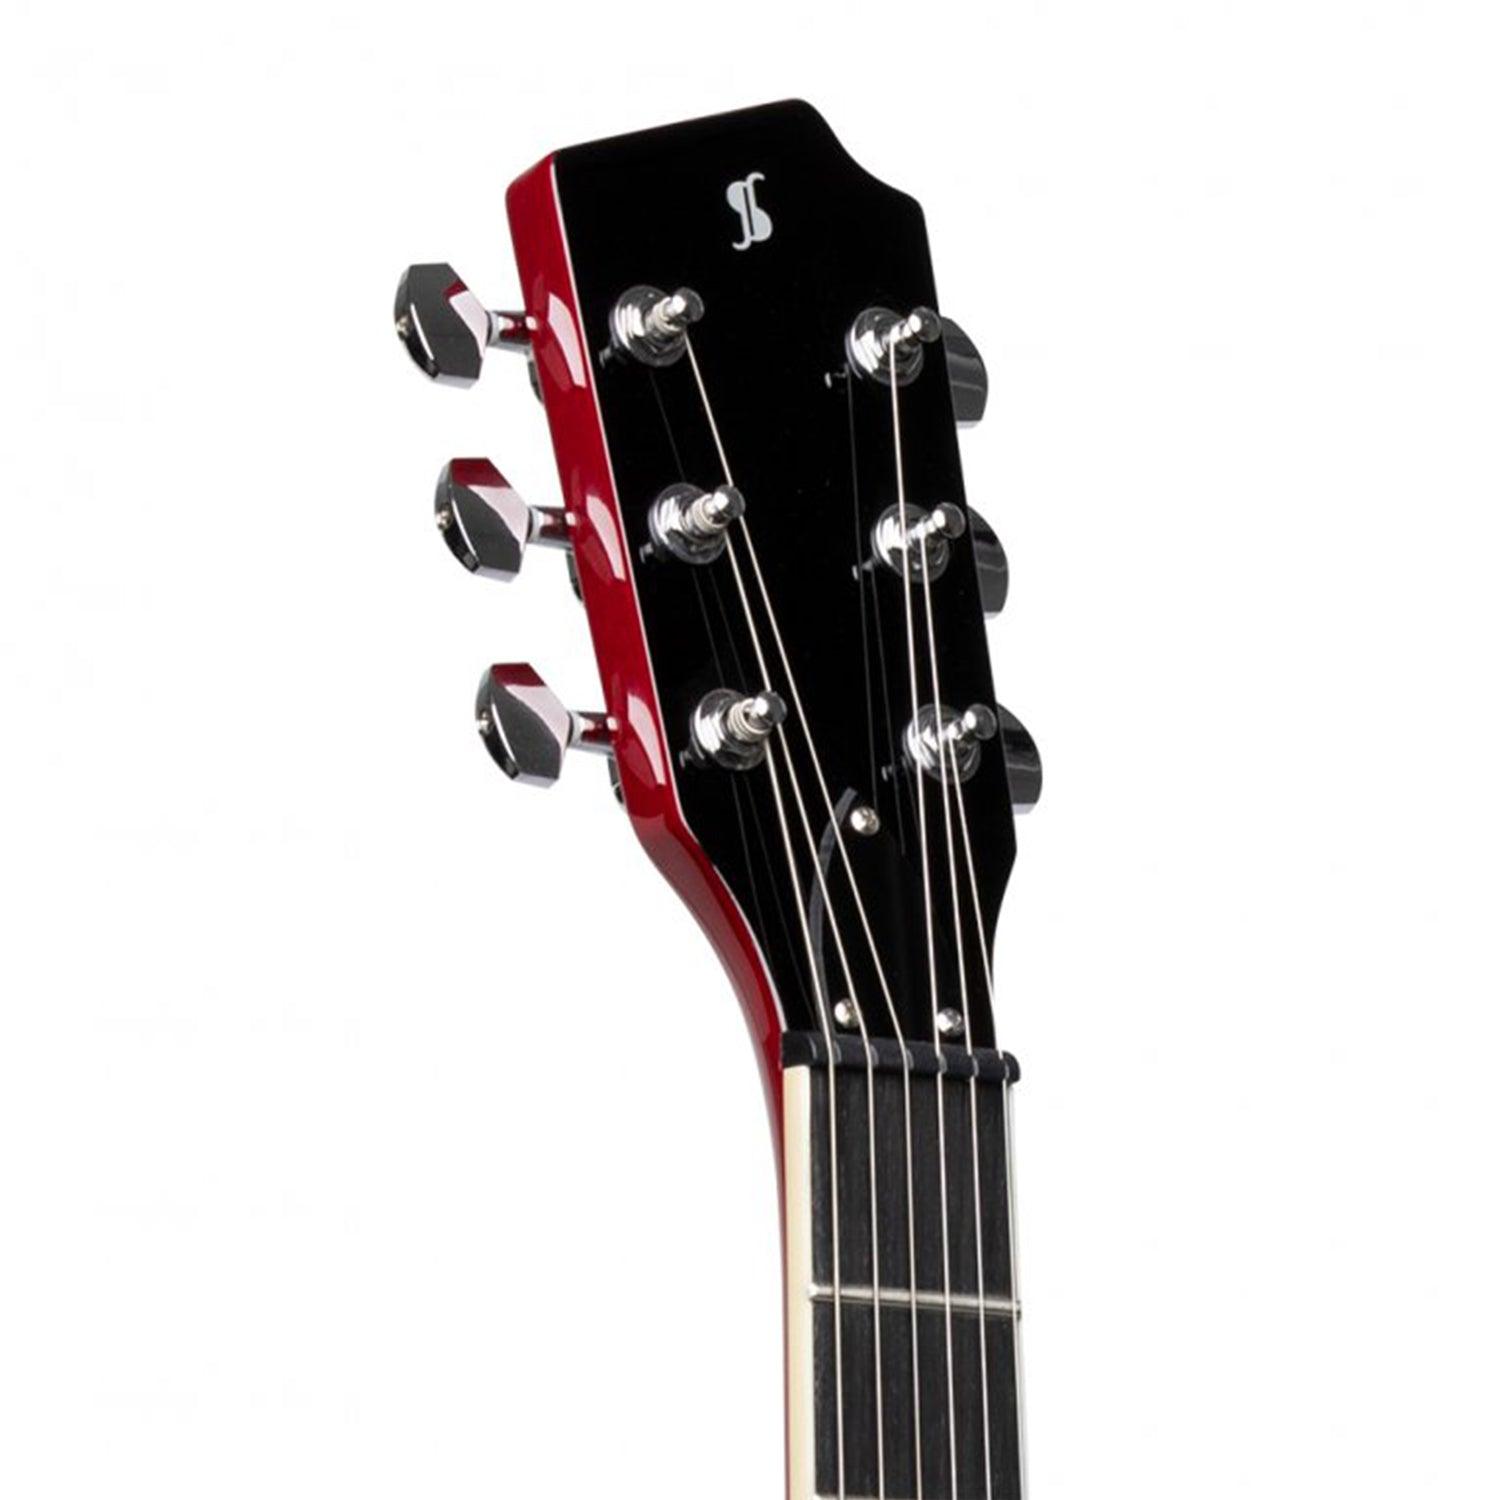 Stagg SVY DC TCH Silveray series DC model Electric Guitar with solid mahogany body and double cutaway - DY Pro Audio